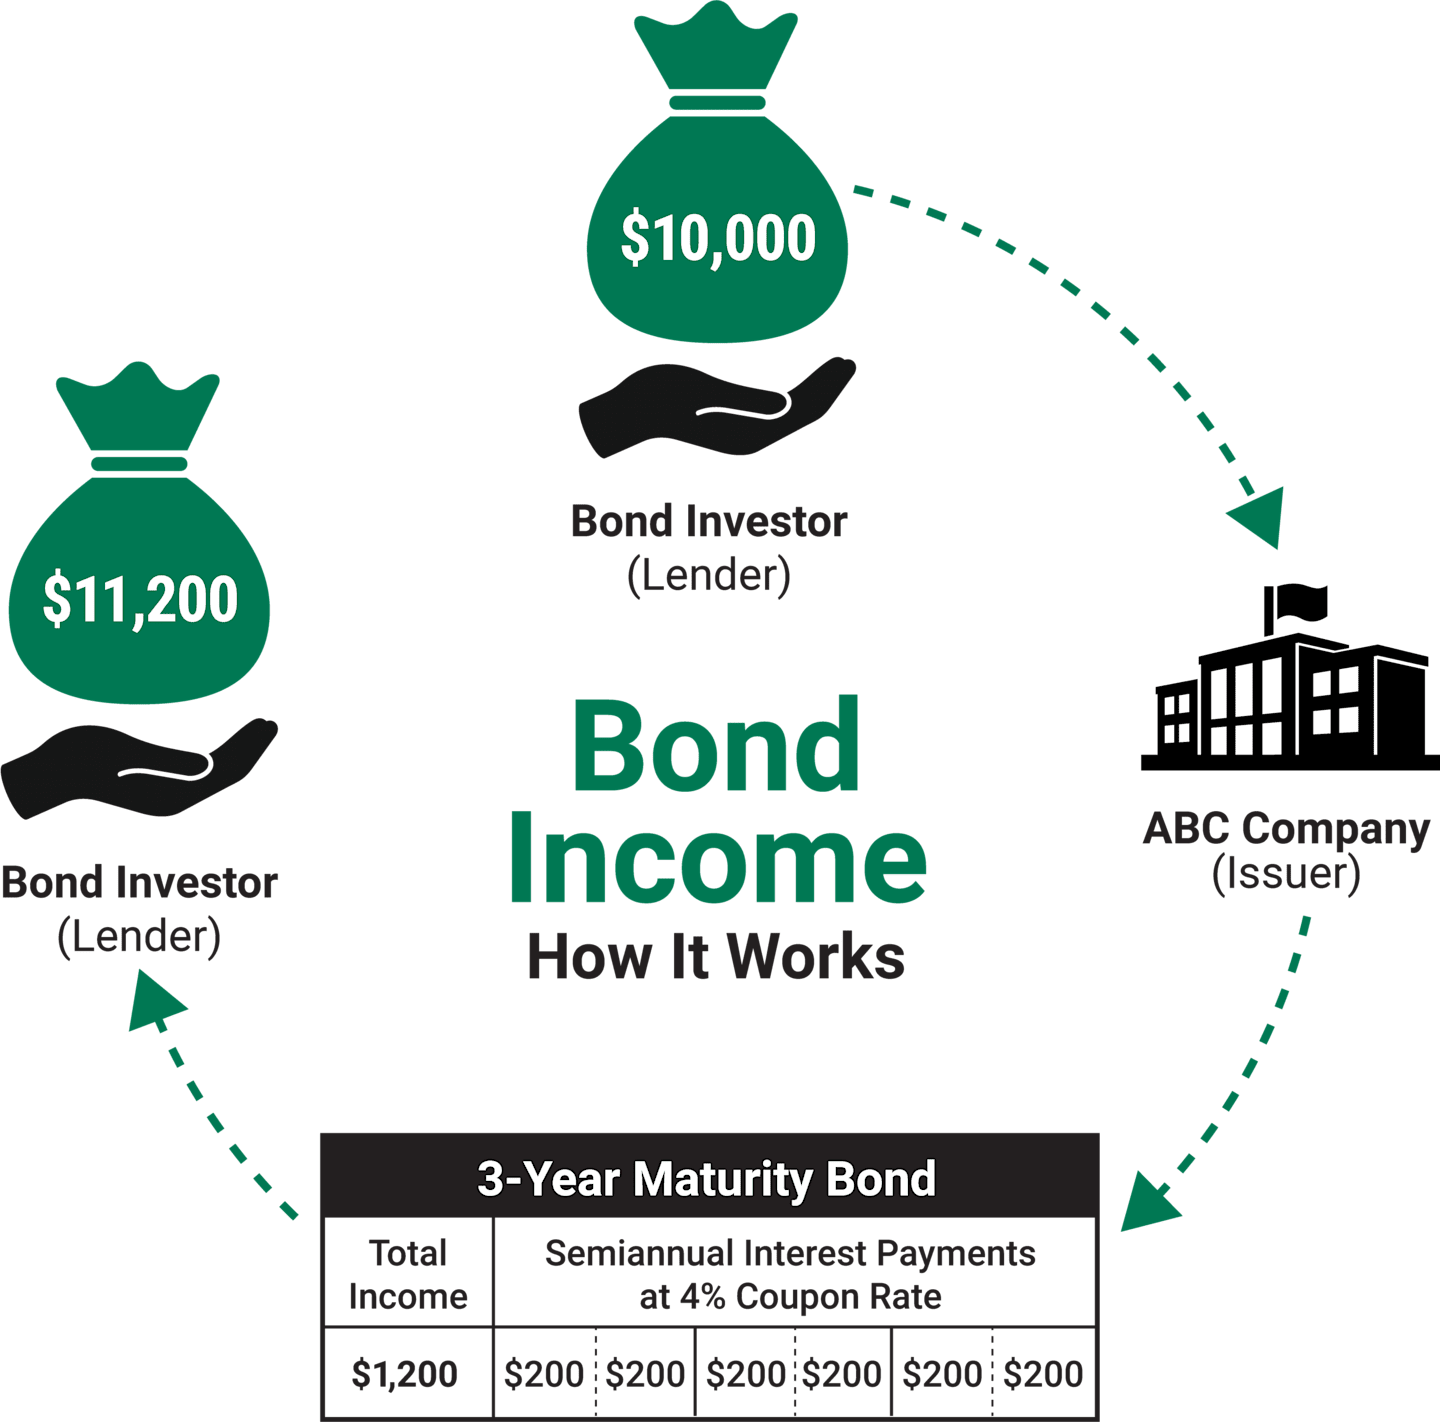 Bond investor lends $10,000 to ABC Company (issuer). A 3-year maturity bond with semiannual interest payments at 4% coupon rate ($200 twice per year) = $1200 total income. After 3 years the investor has a total of $11,200.